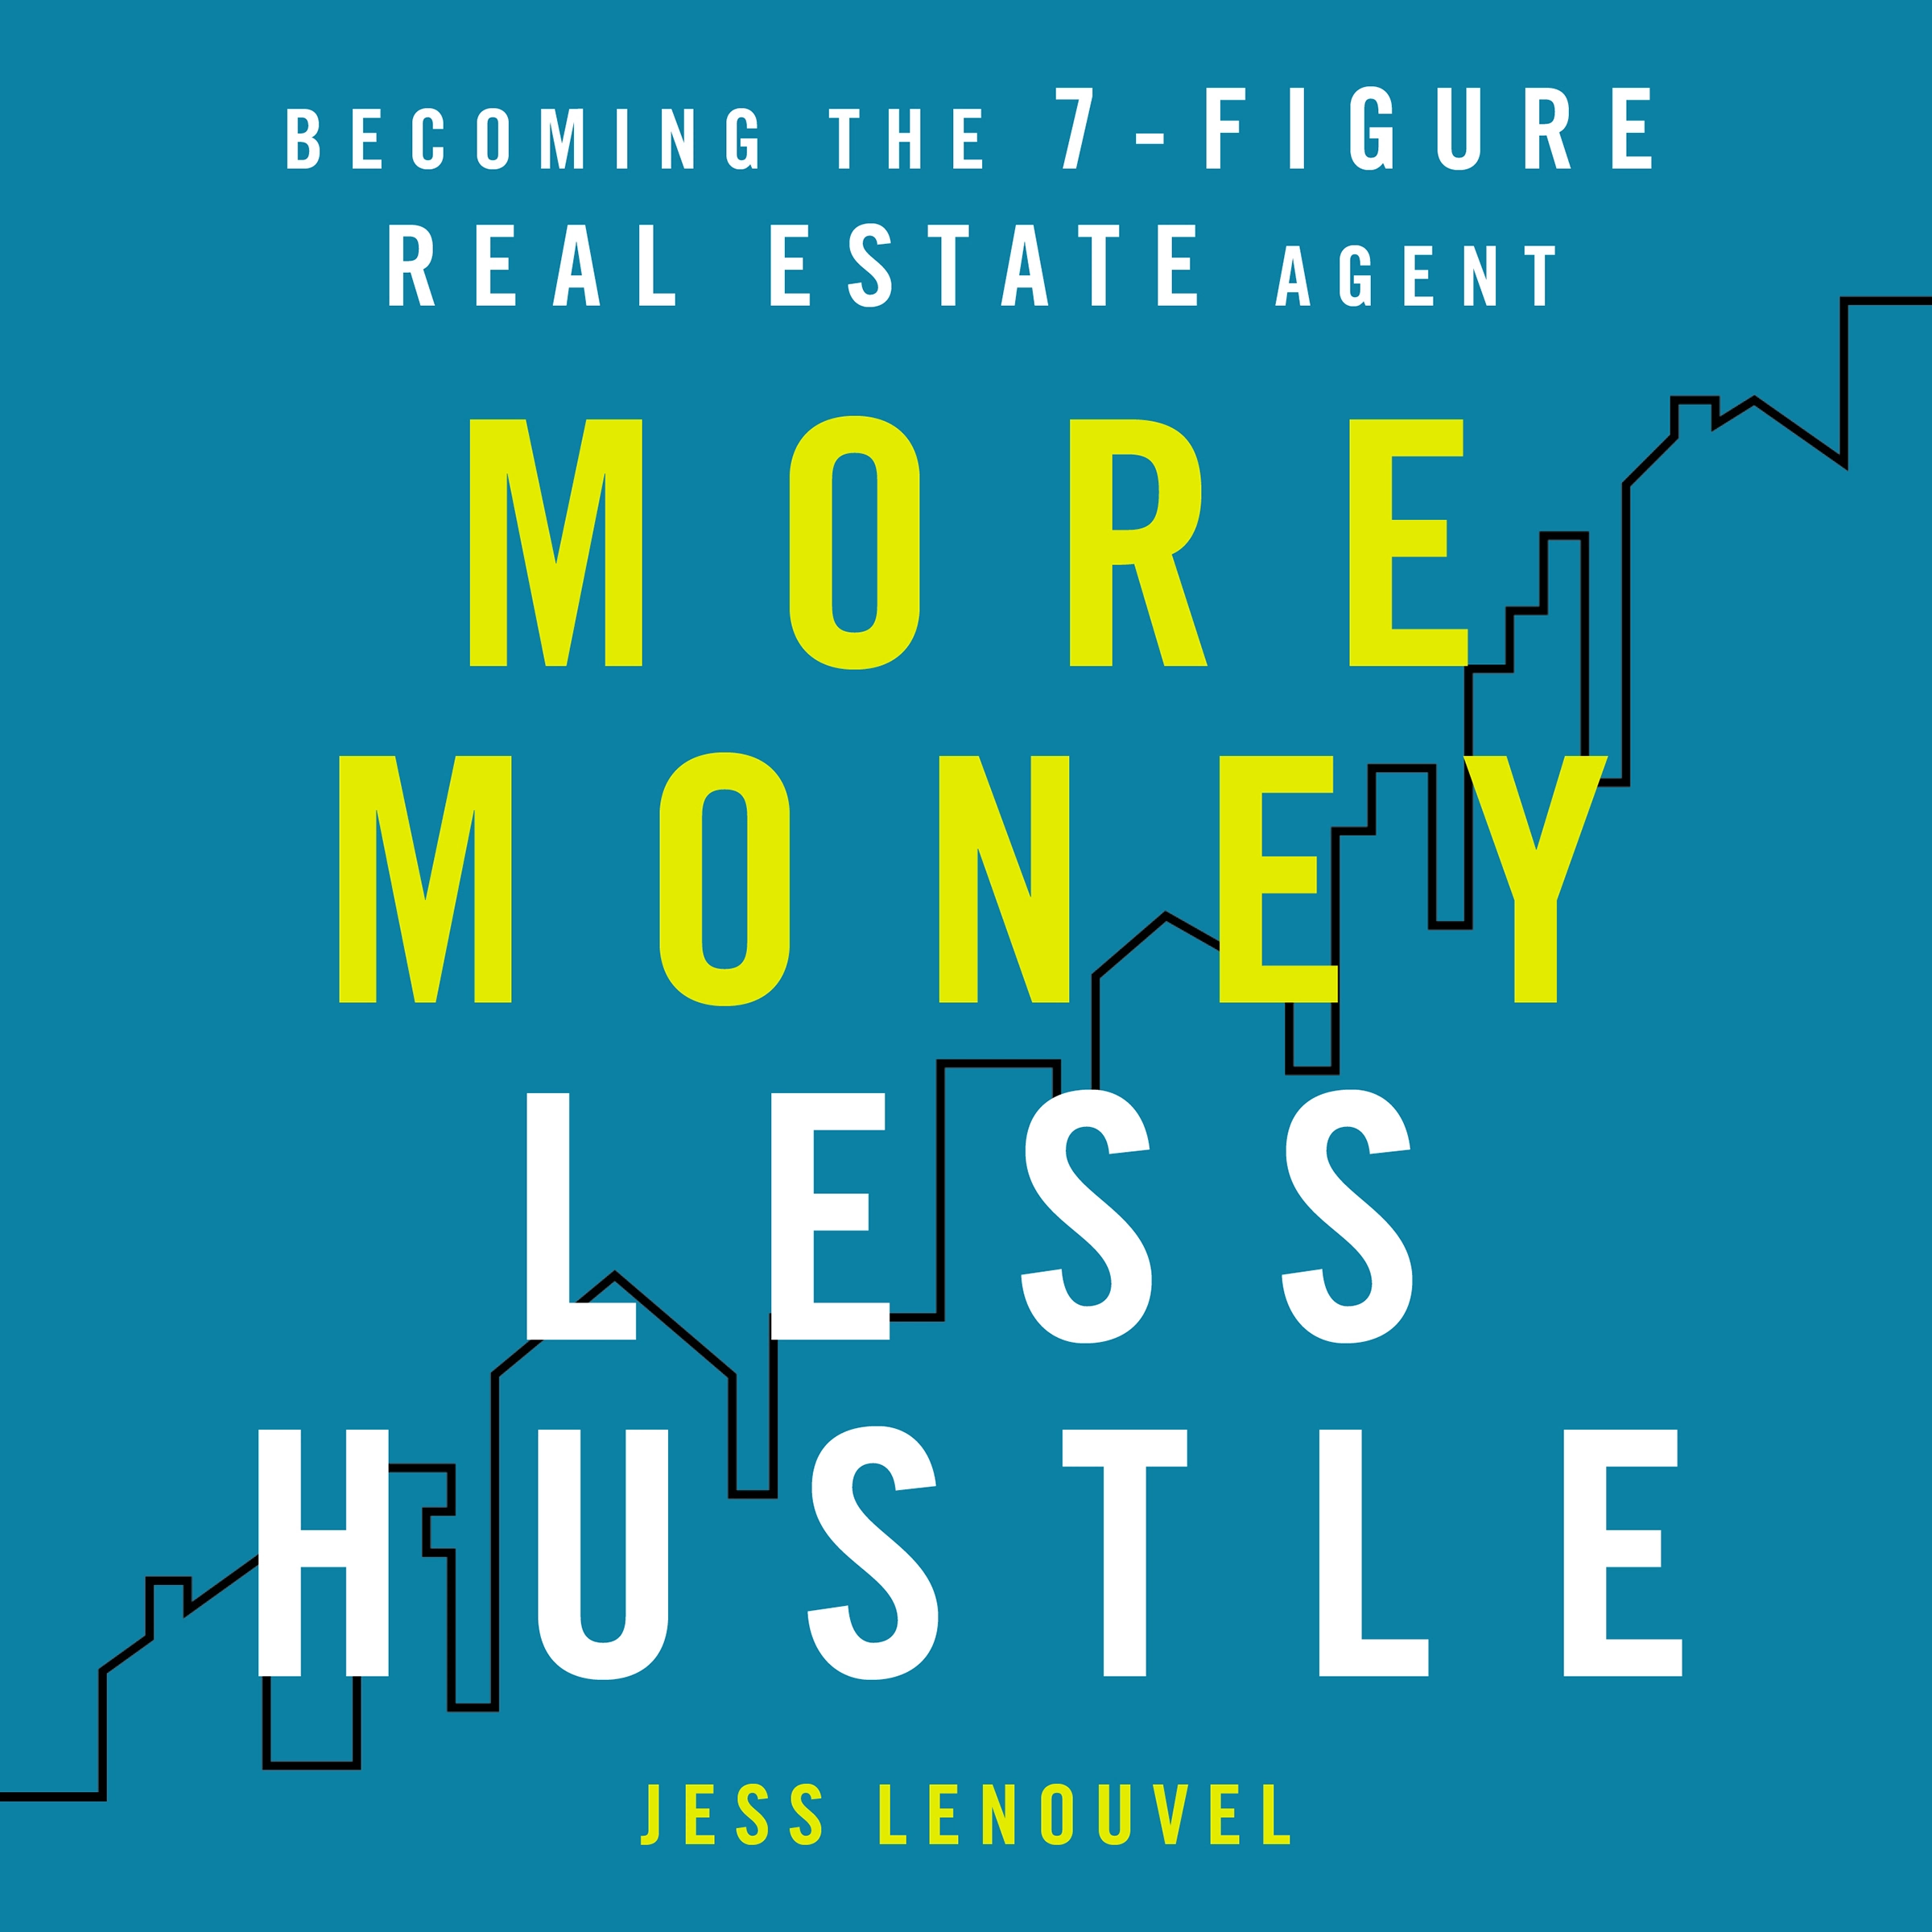 More Money, Less Hustle: Becoming the 7-Figure Real Estate Agent Audiobook by Jess Lenouvel